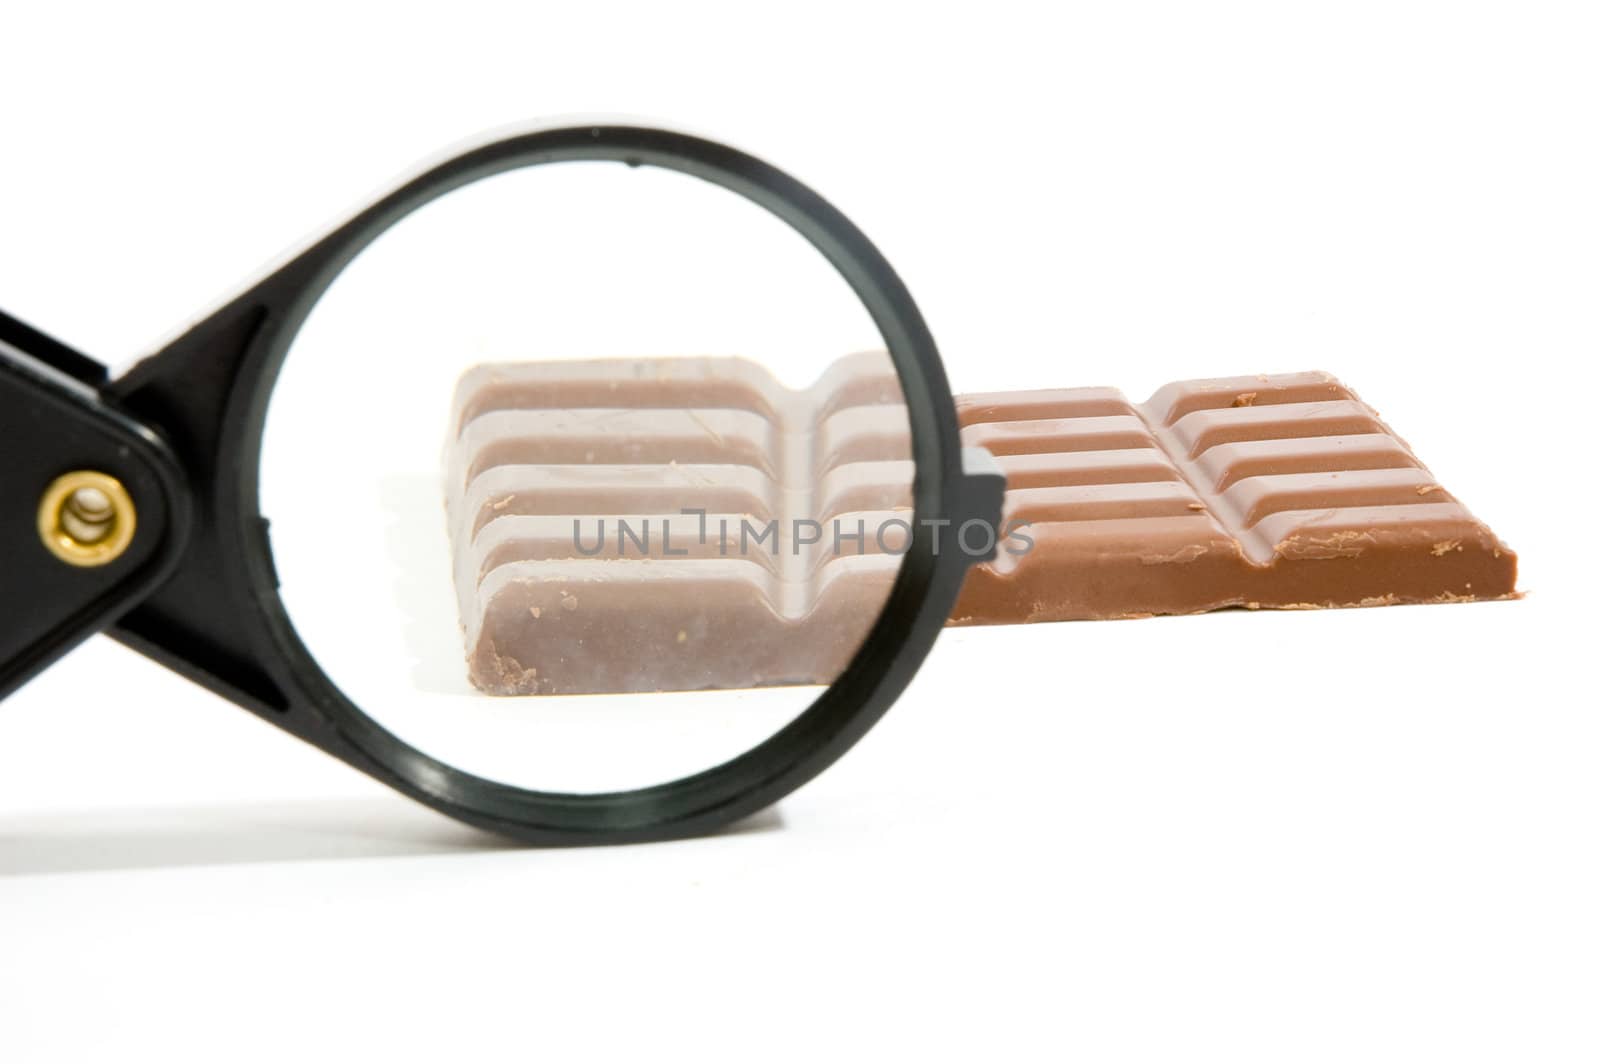 bar of chocolat sized up by a magnifying-glass by ladyminnie